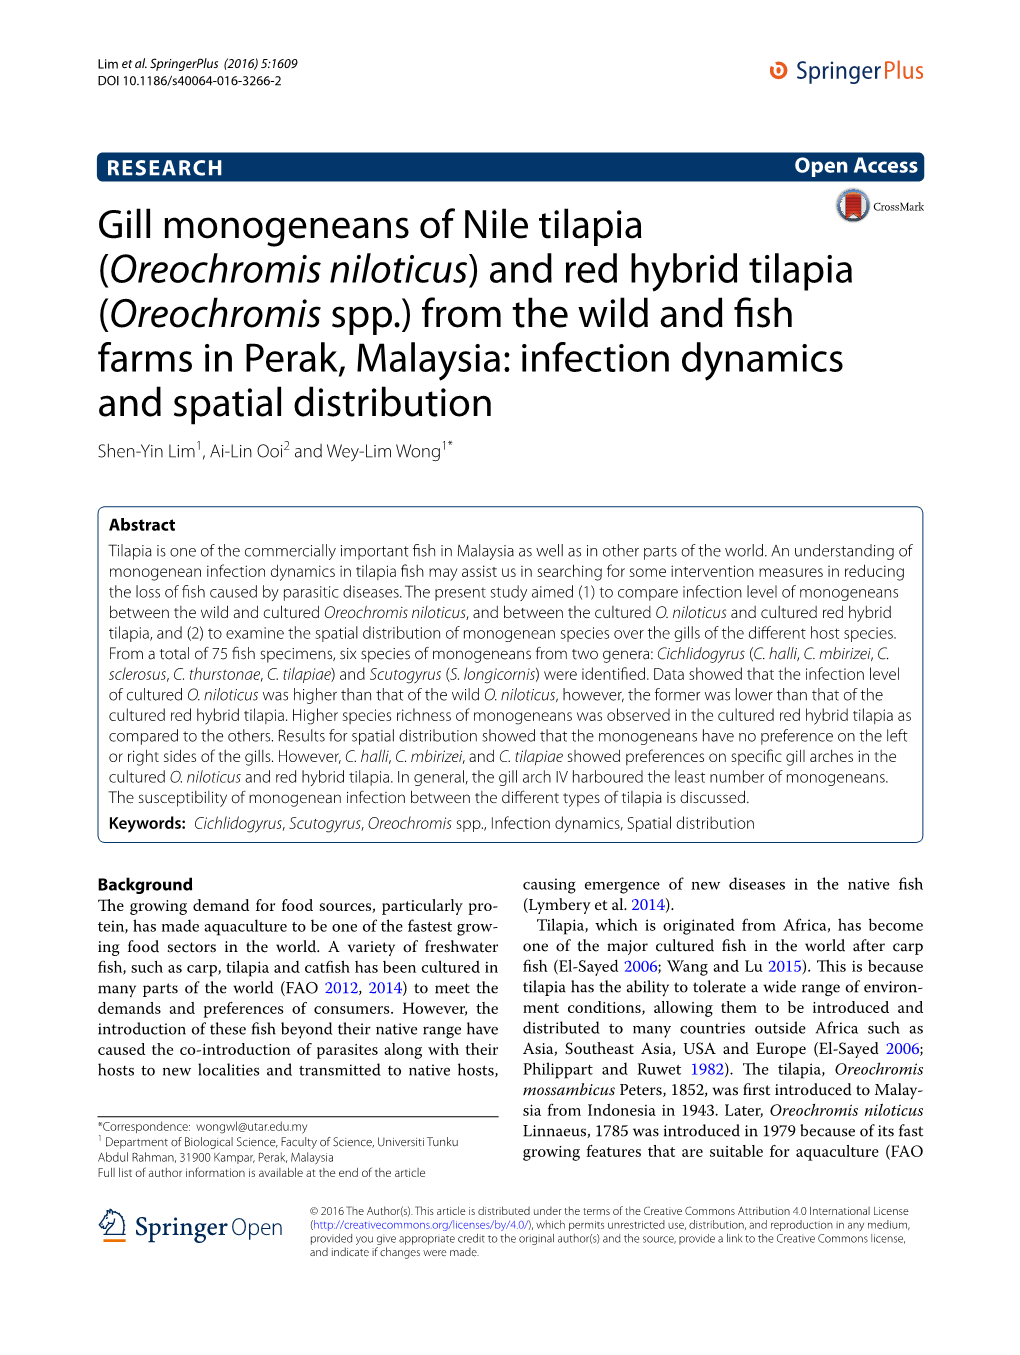 Gill Monogeneans of Nile Tilapia (Oreochromis Niloticus) and Red